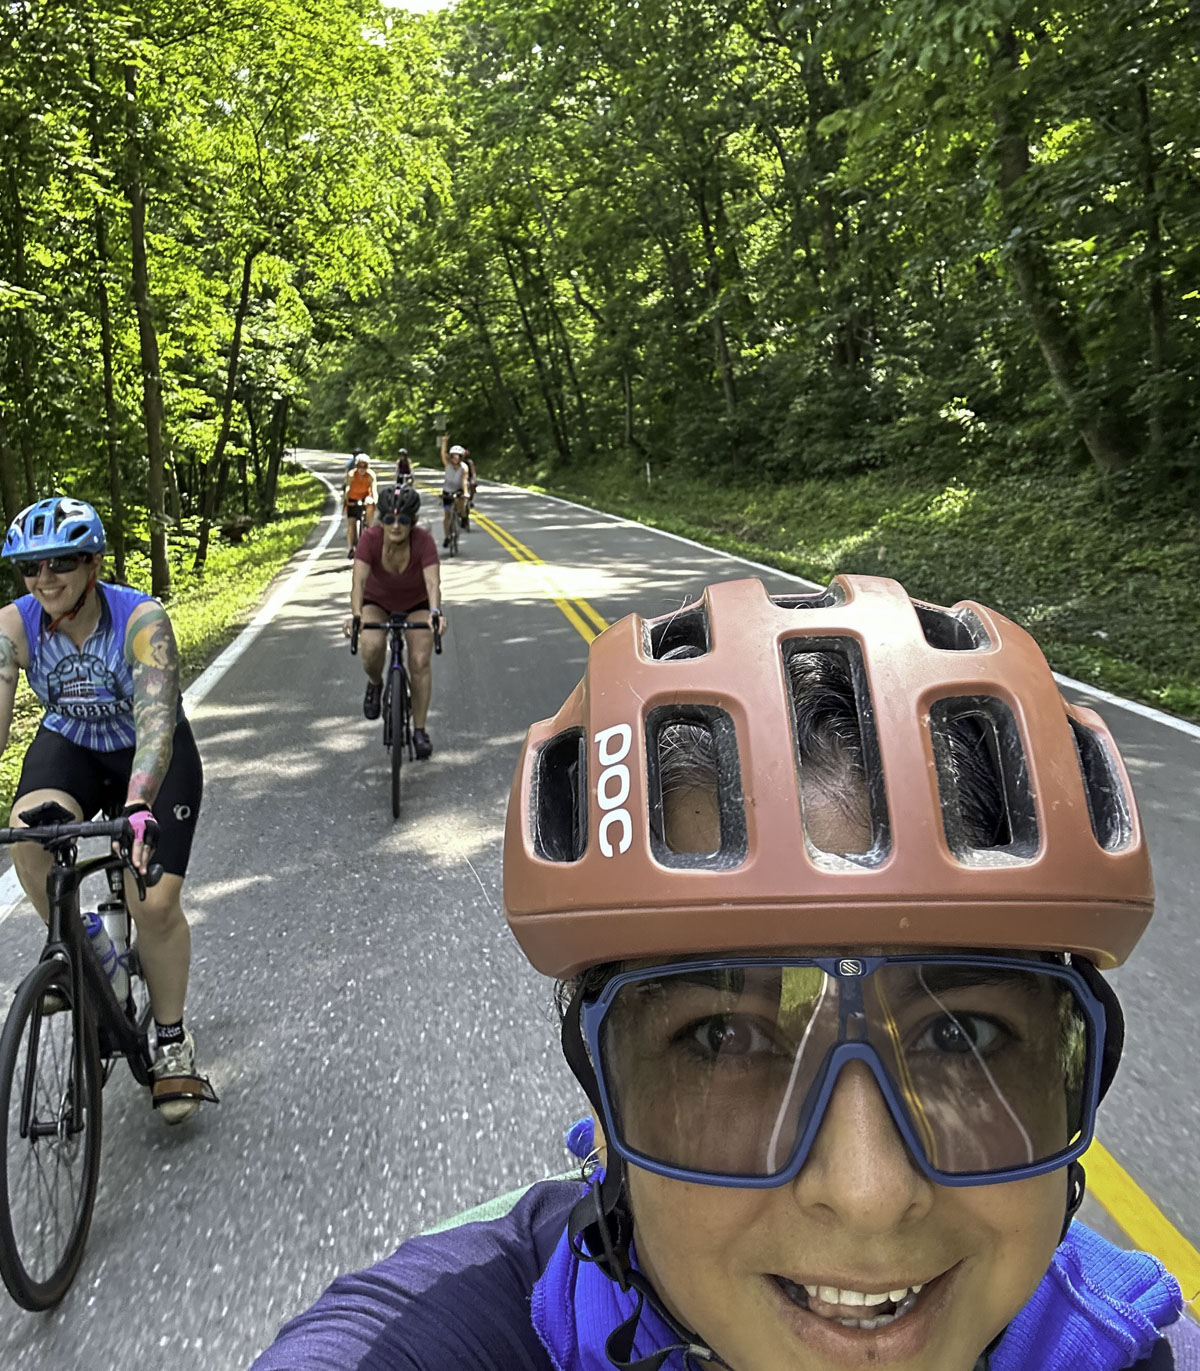 A woman takes a selfie as she rides her bicycle down the road, getting several cyclists behind her in the shot